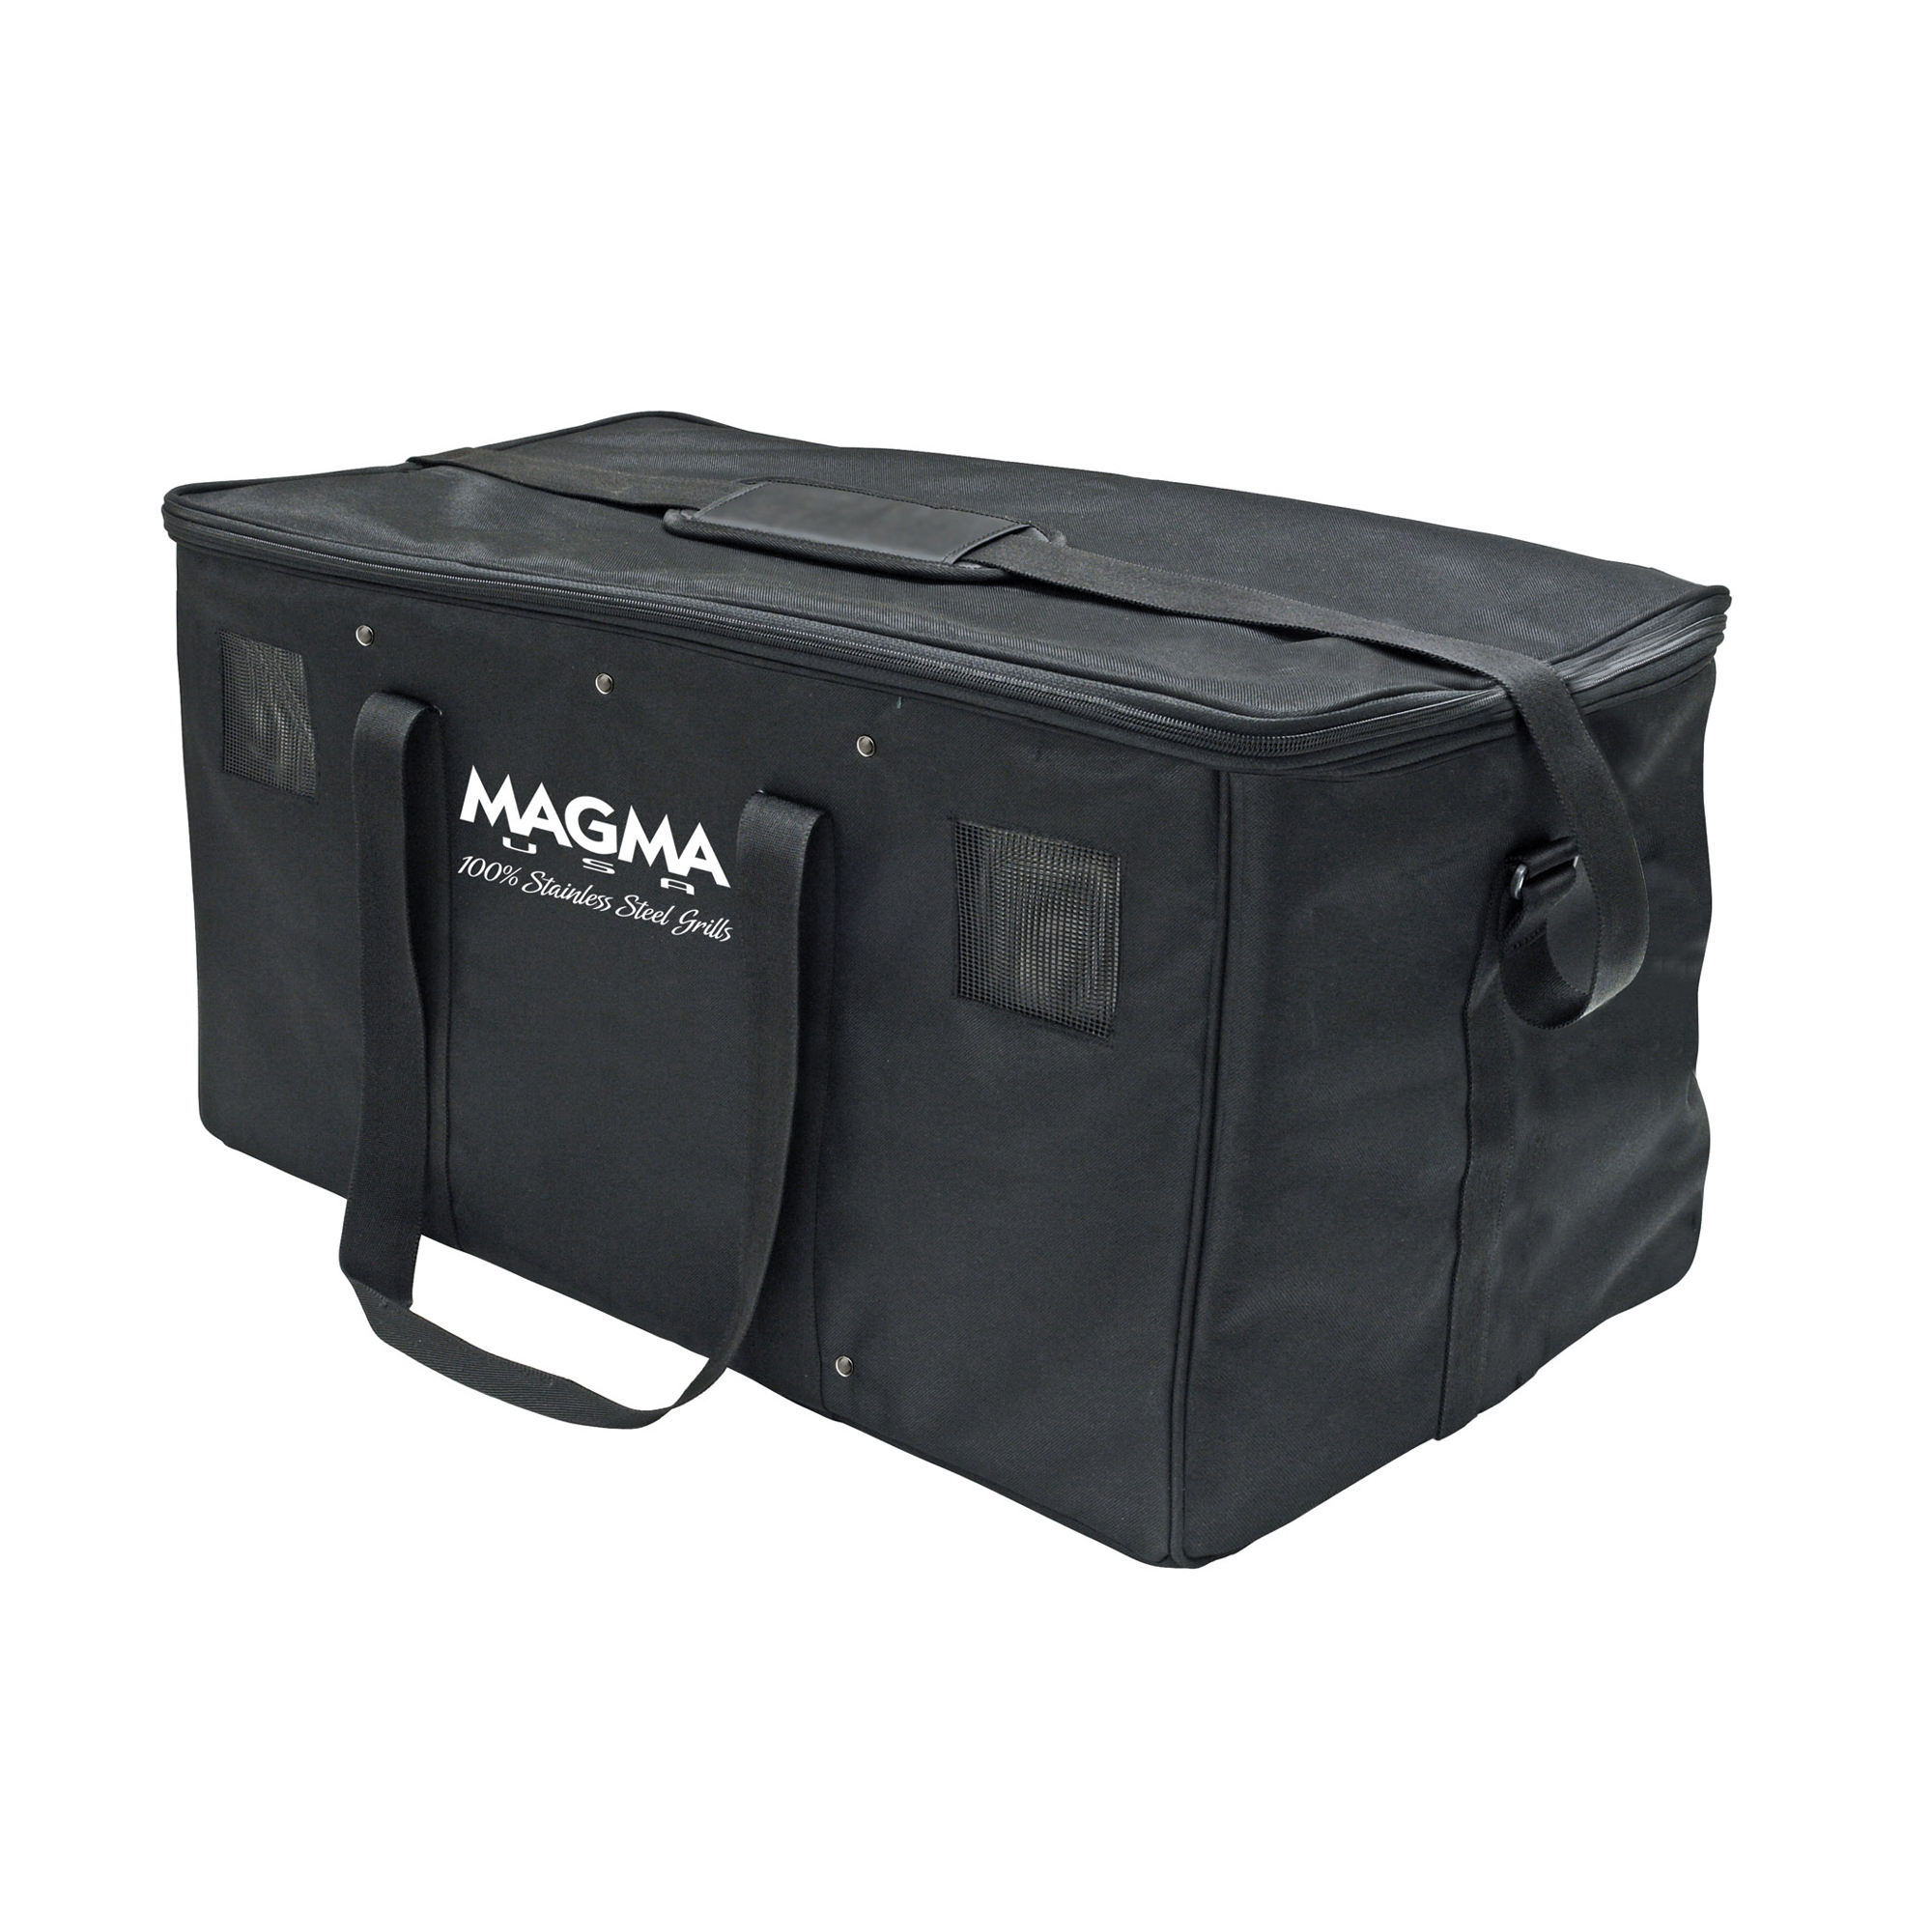 Magma A10-1292 Padded 12 x 18 Inch Rectangular Grill Gear Carrying Case, Black - image 3 of 3